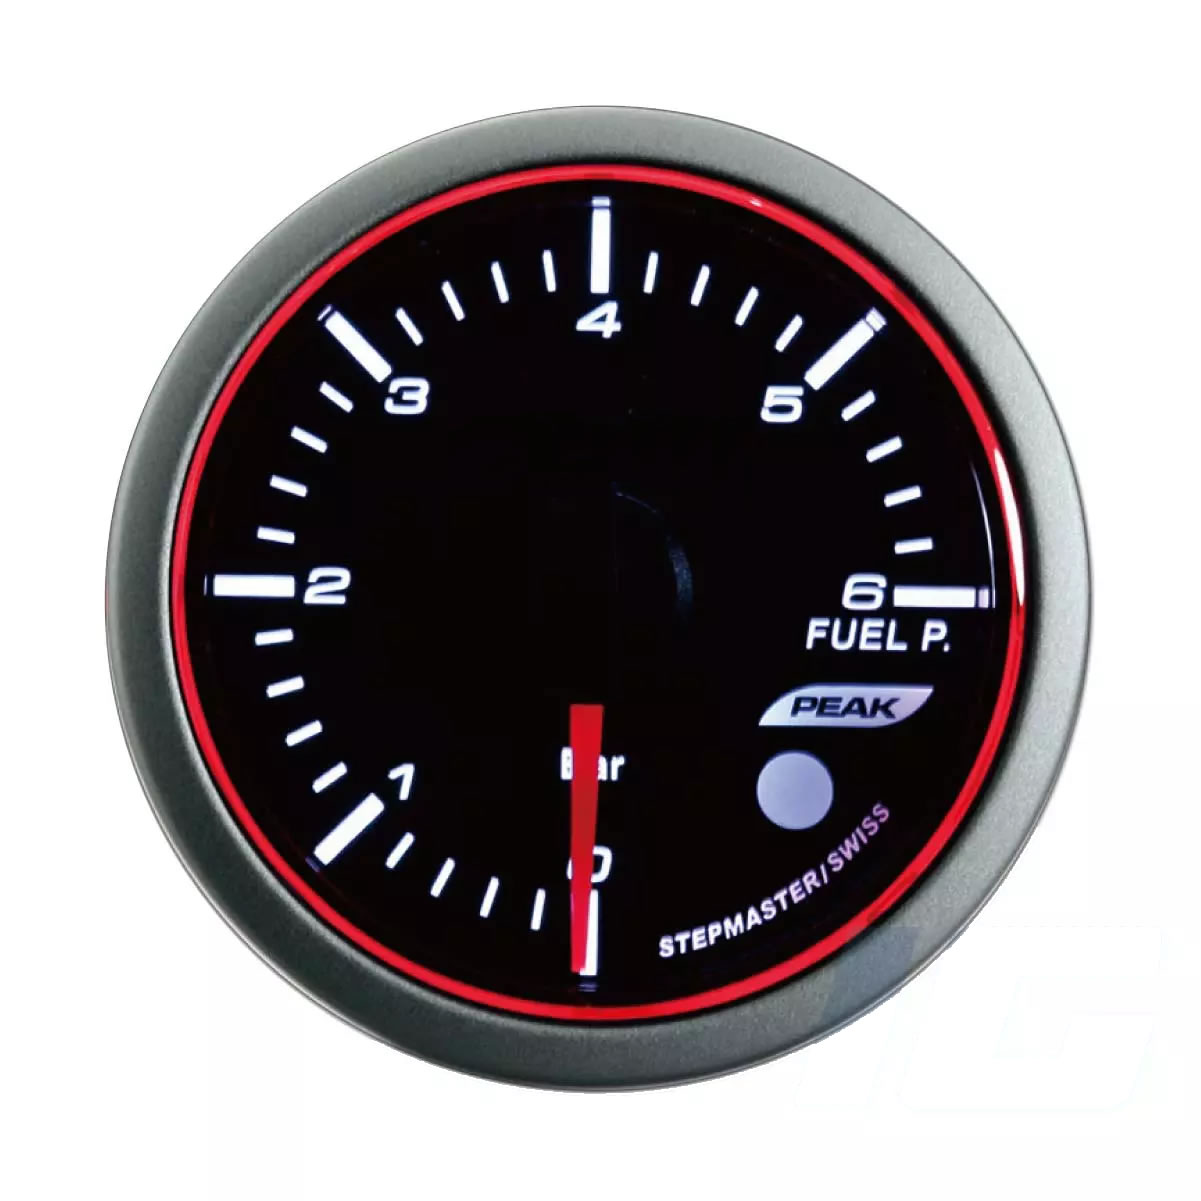 Performance Car Gauges - Fuel Pressure Gauge With Sensor and Warning and Peak For Your Sport Racing Car